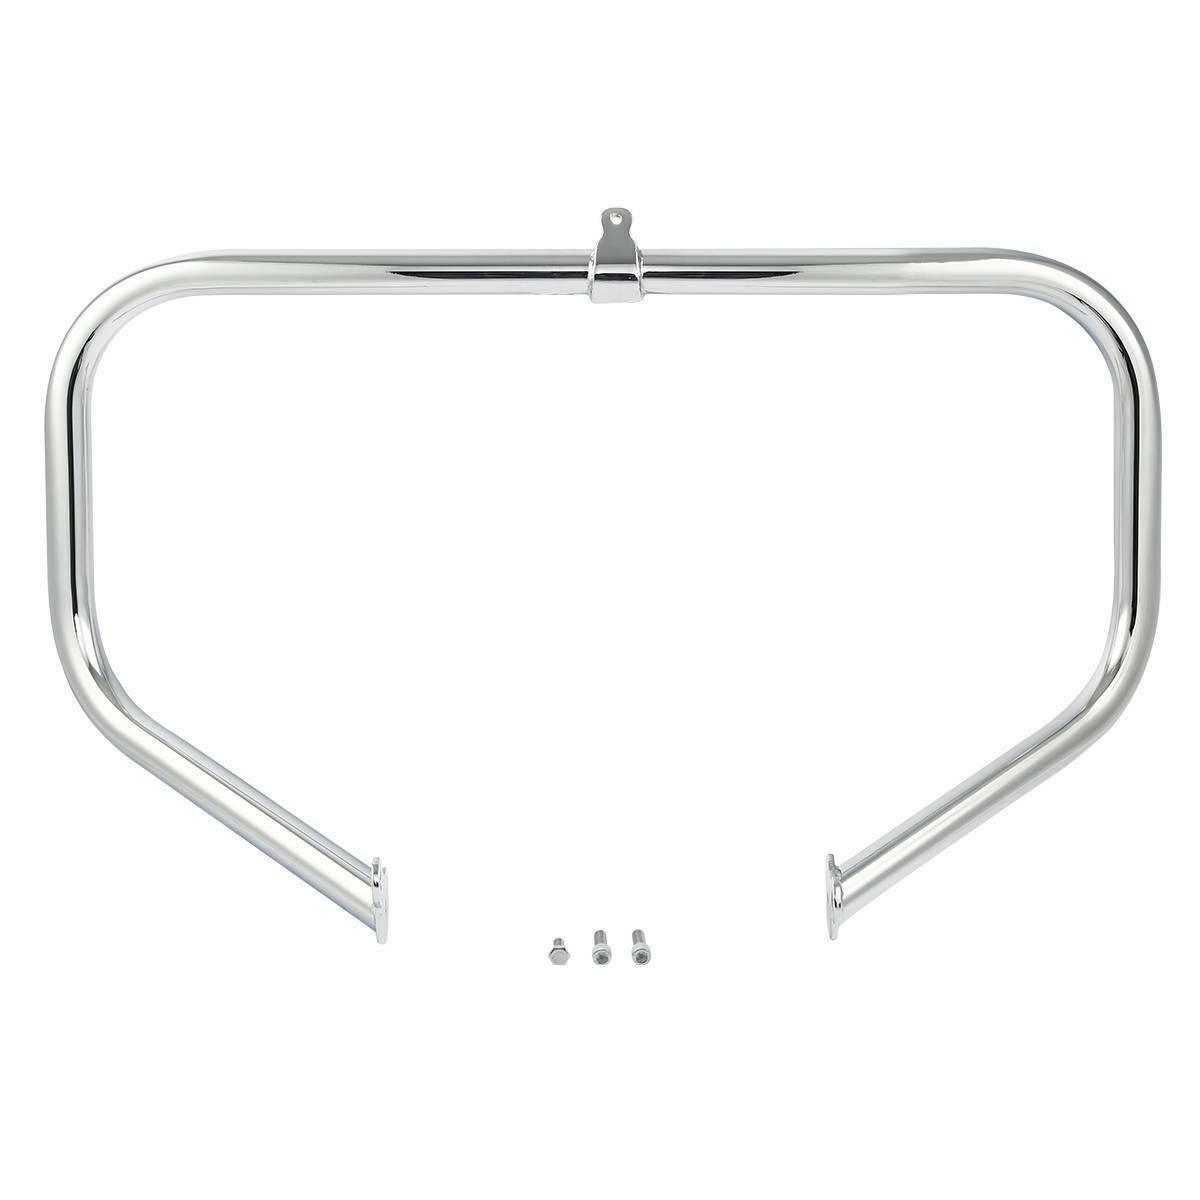 Engine Highway Crash Guard Bar For Harley Road Glide Electra Glide Ultra Classic - Moto Life Products